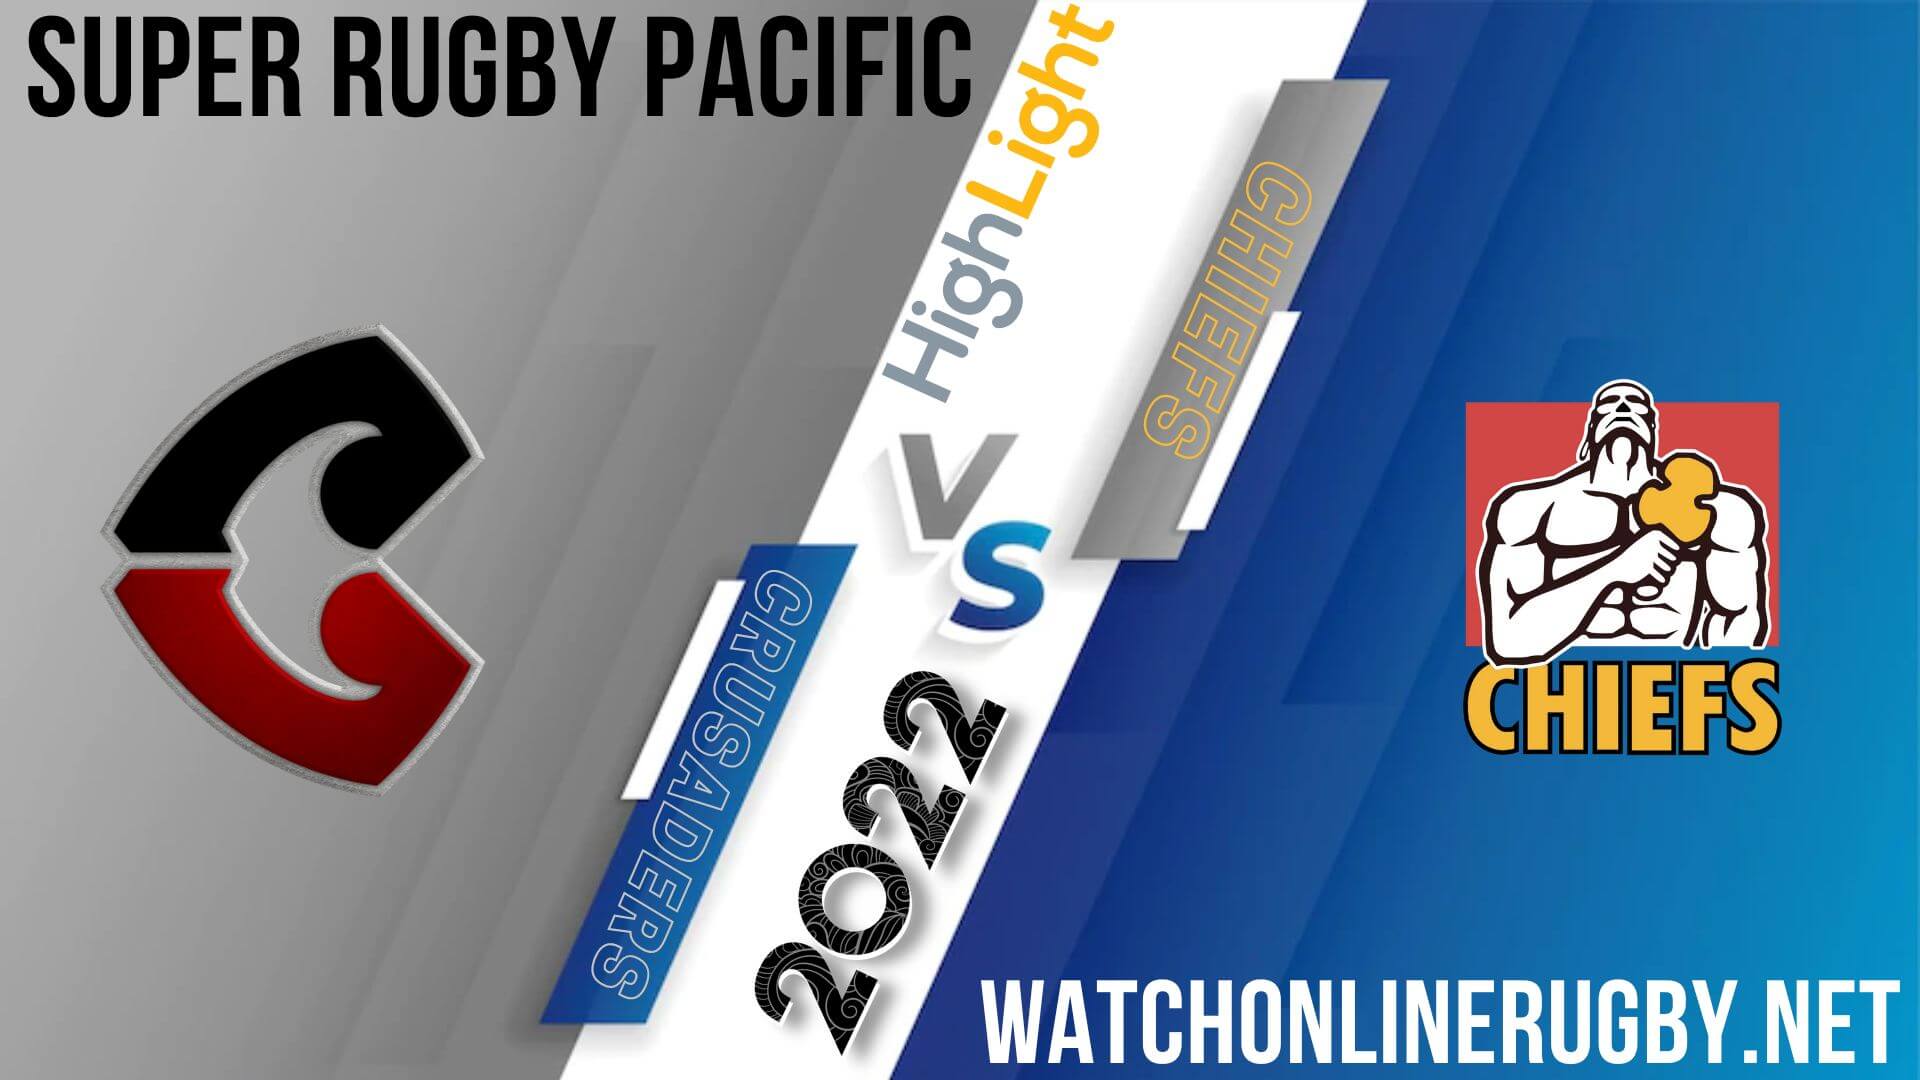 Crusaders Vs Chiefs Super Rugby Pacific 2022 Semi Final